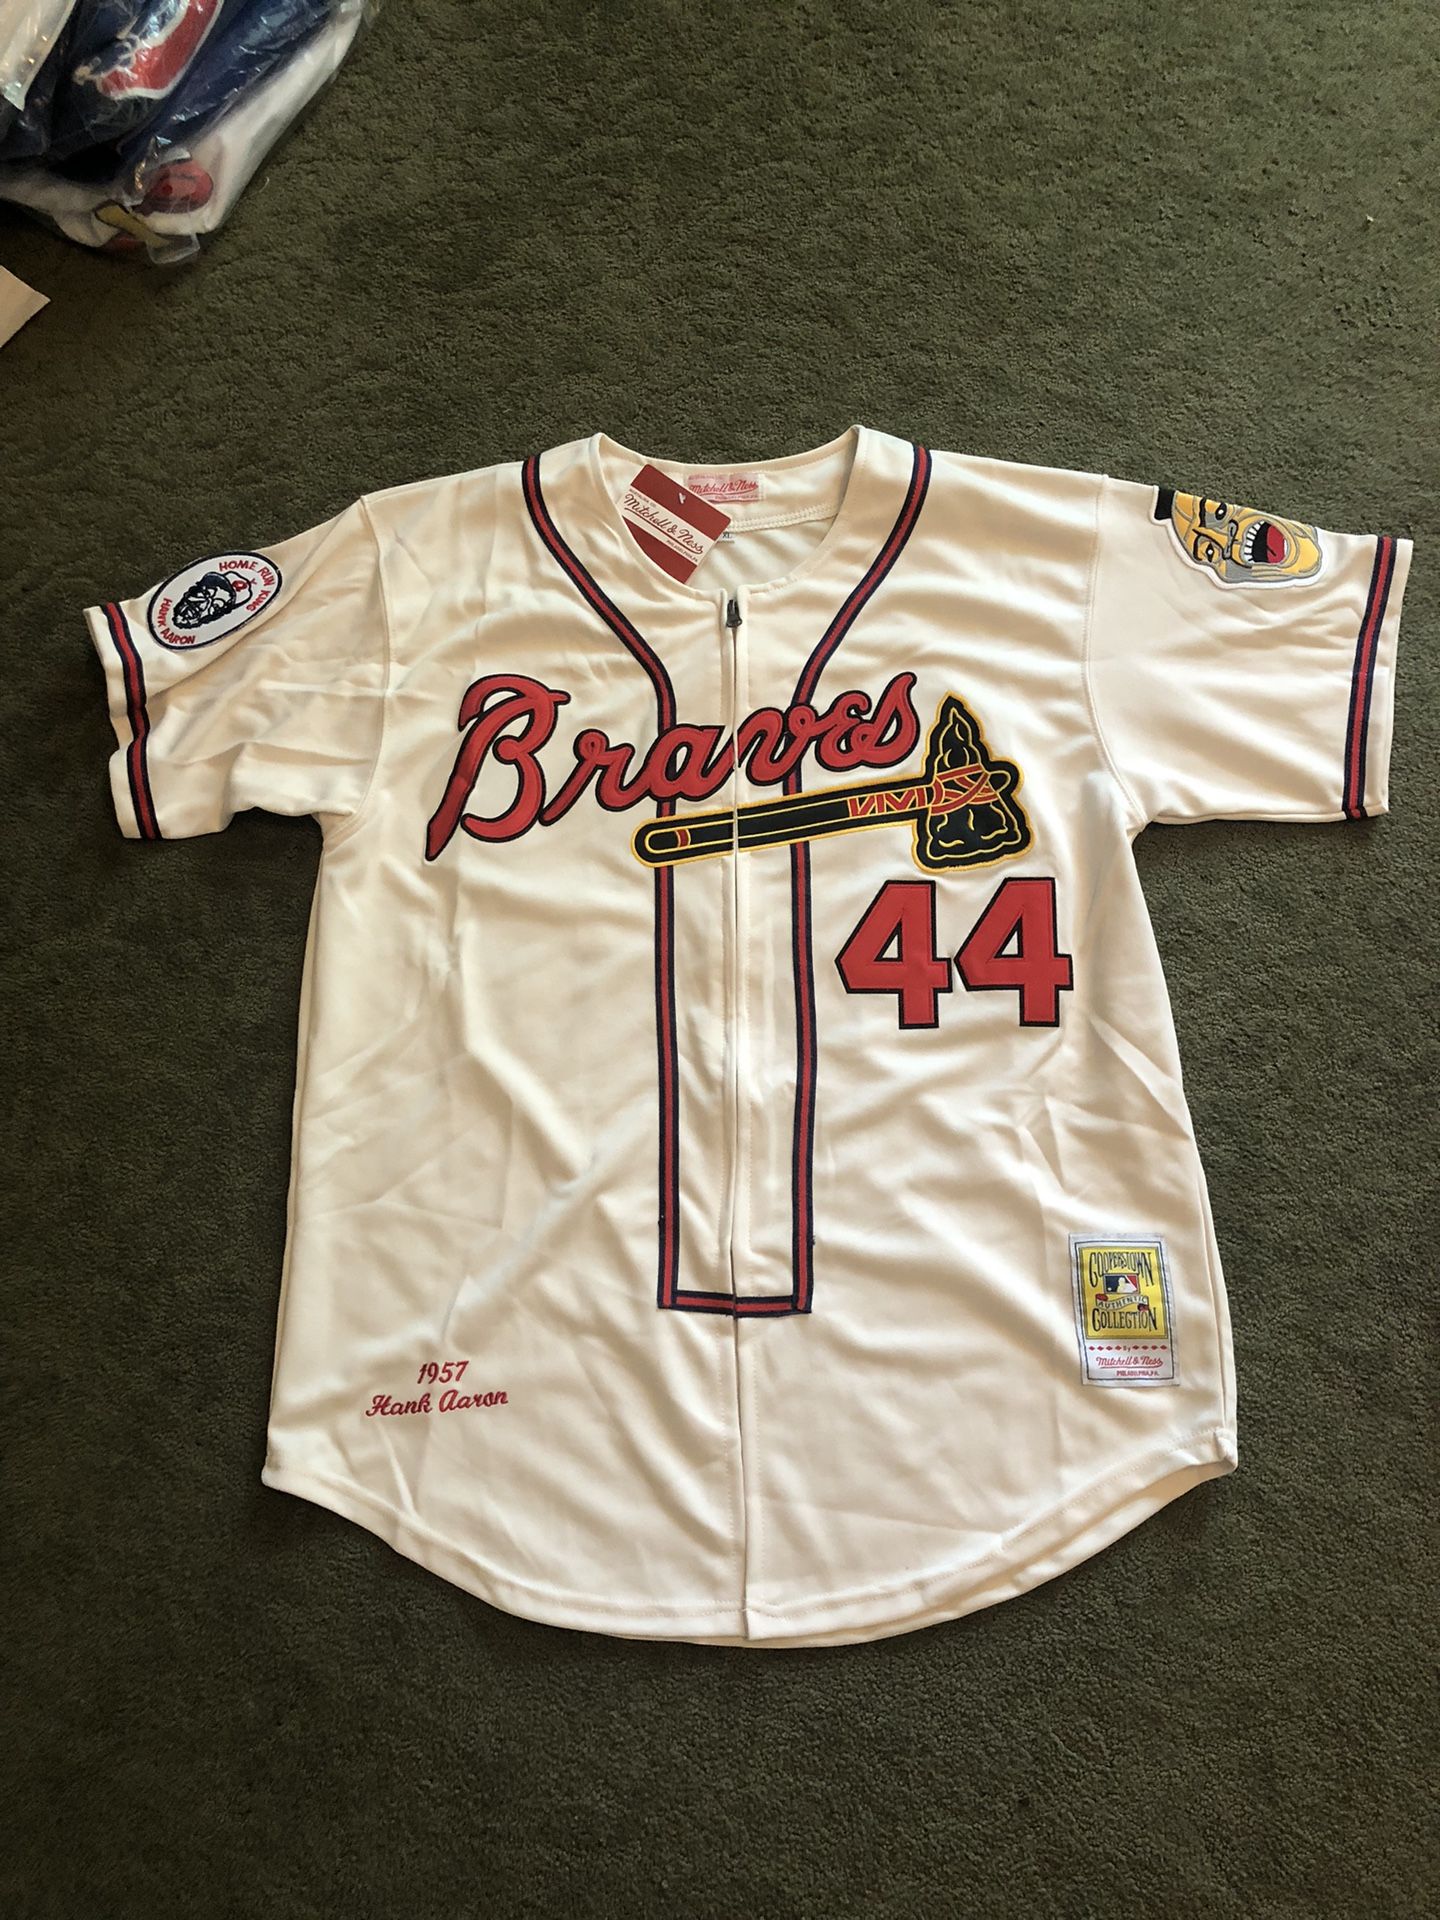 NWT, Braves Hank Aaron 1957 Throwback Jersey, Men's L, All